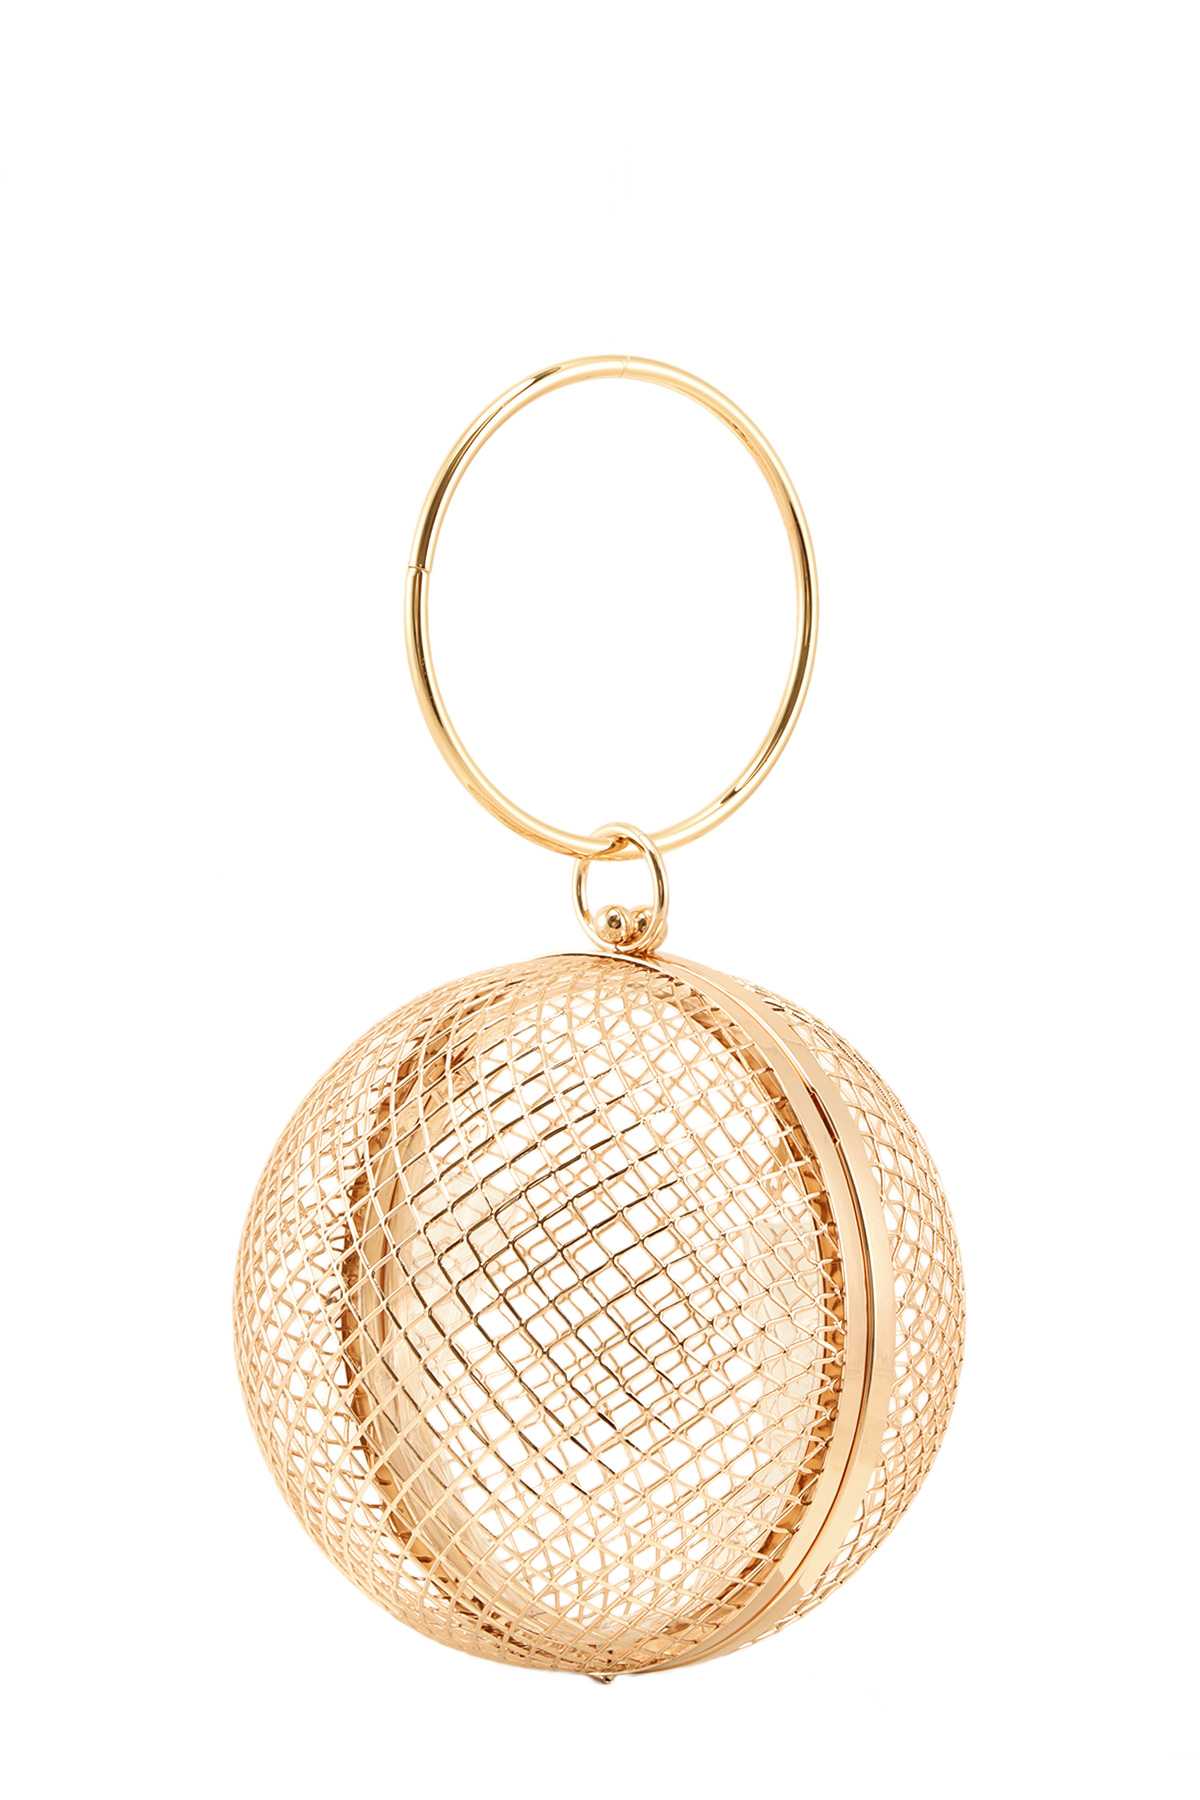 METAL CAGE BALL SHAPE CLUTCH